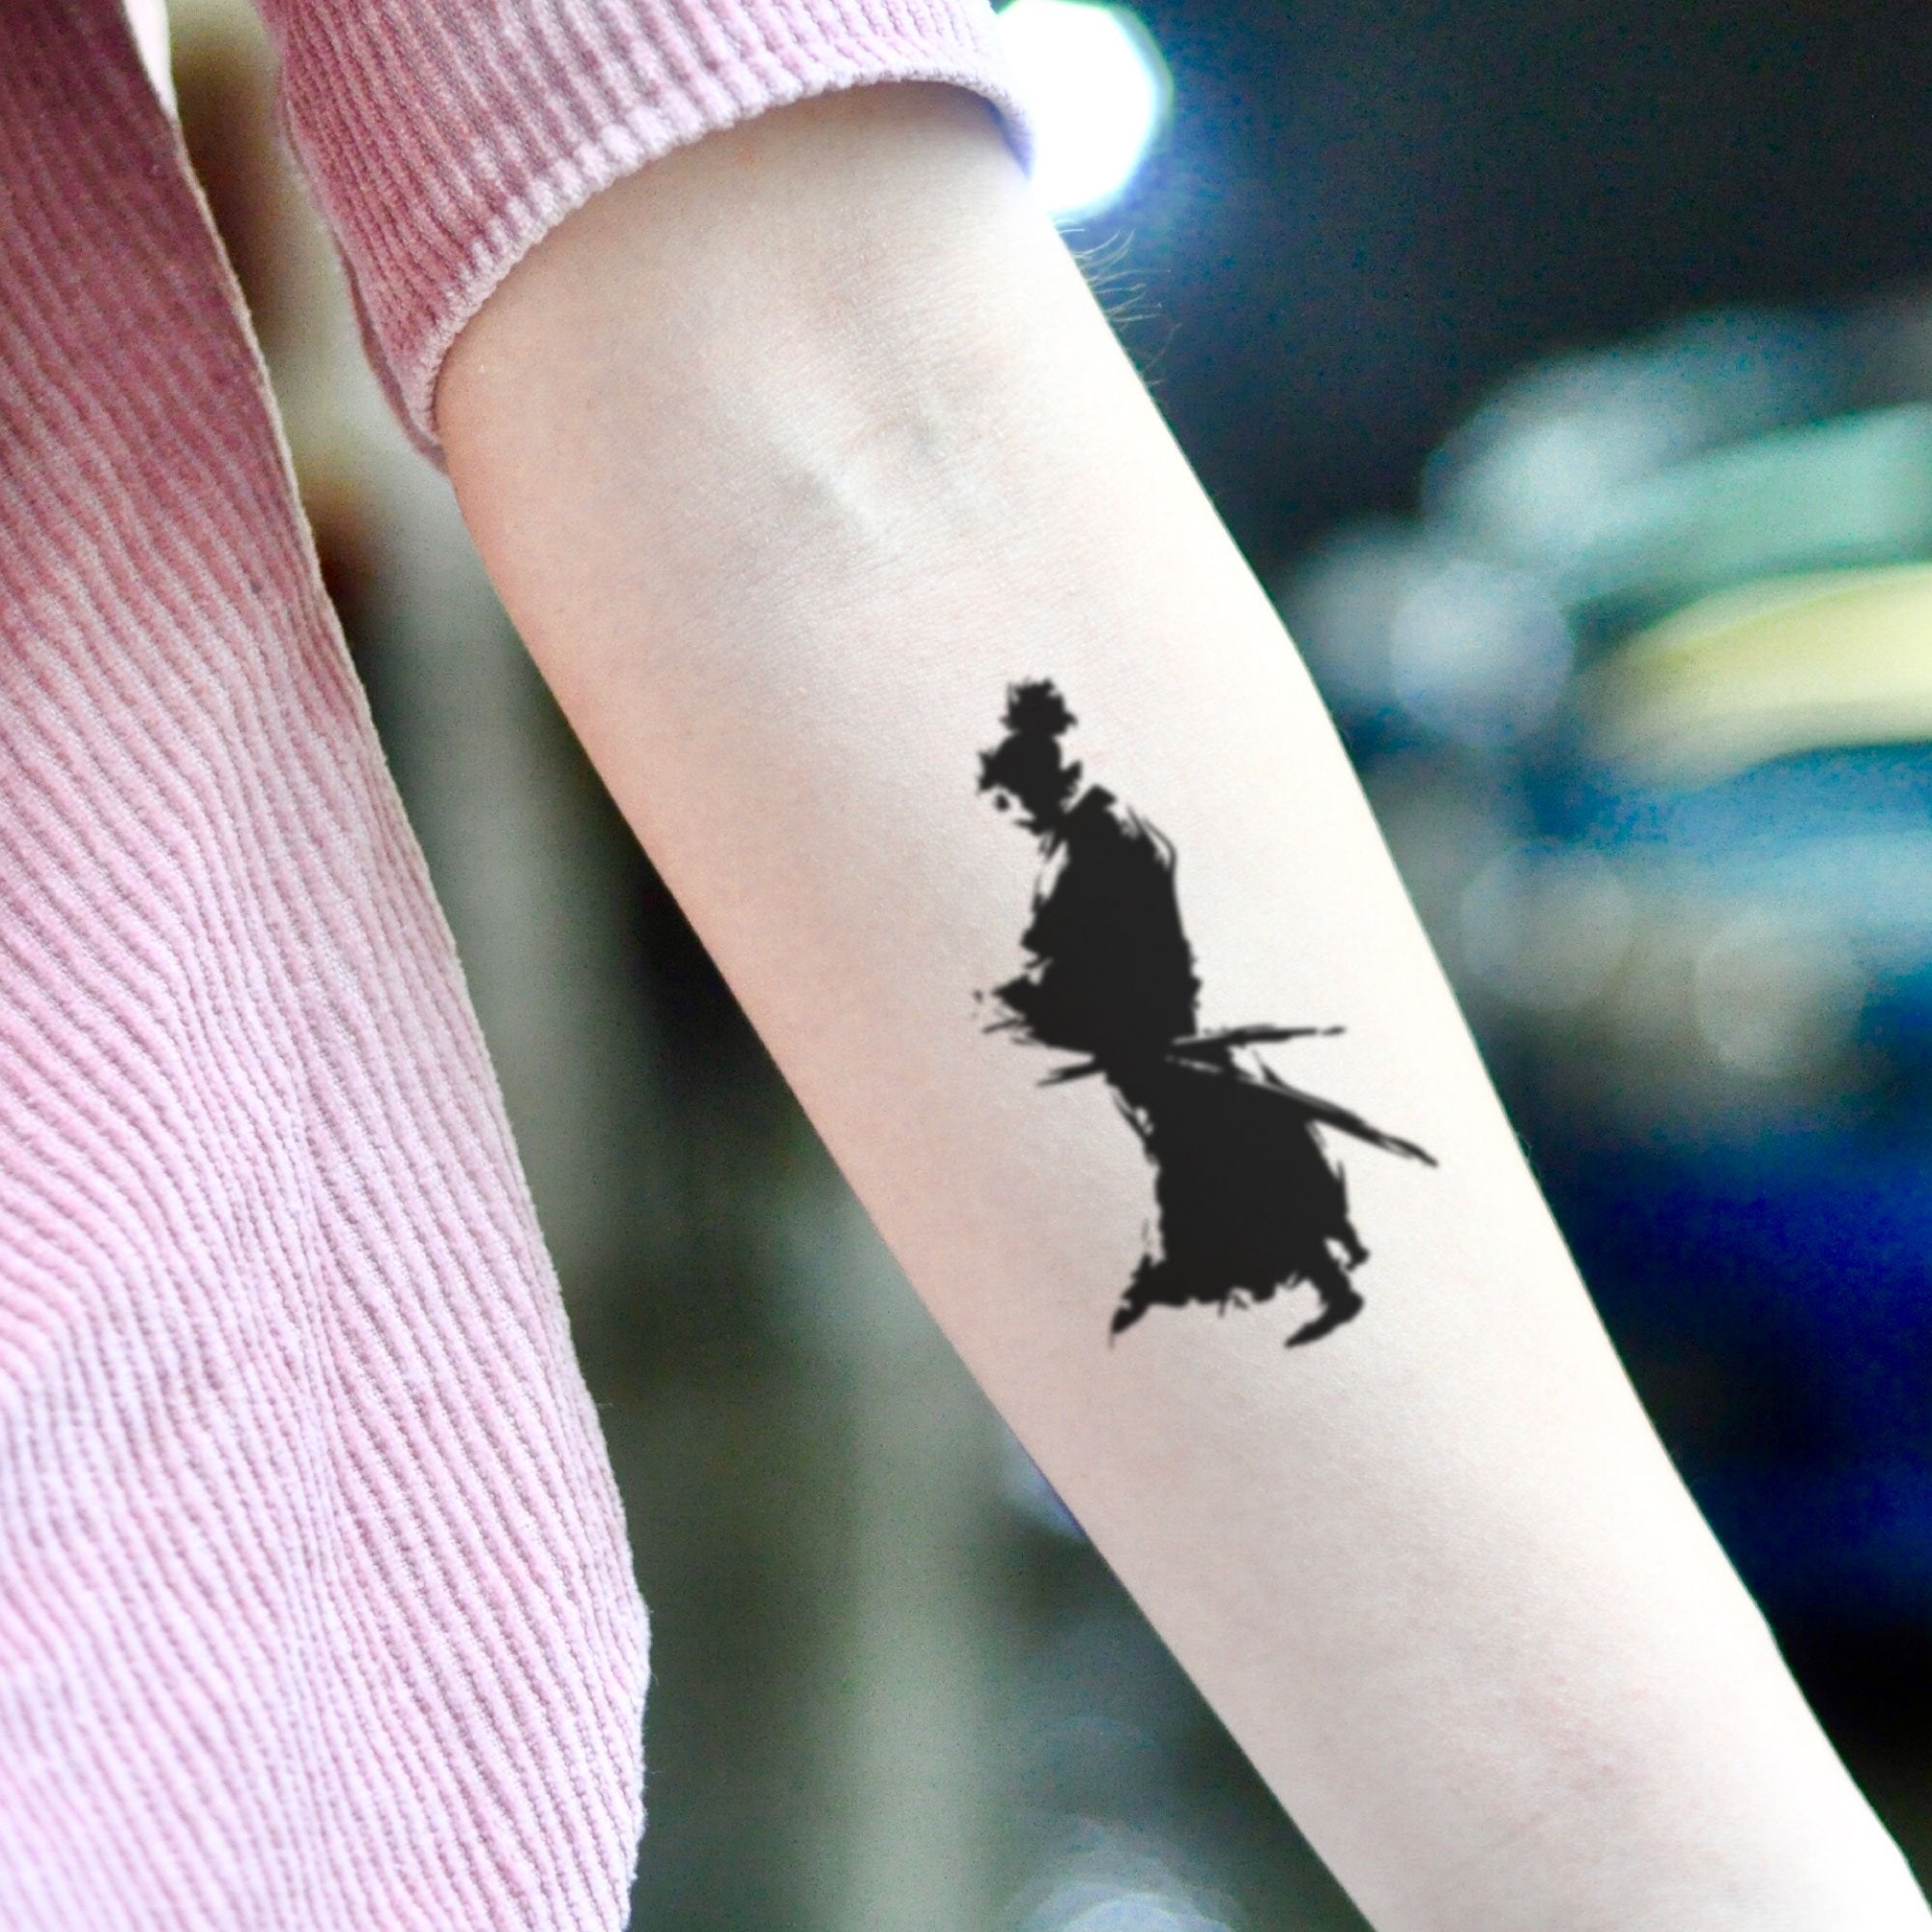 Kappa Tattoo Explained: History, Meanings & More